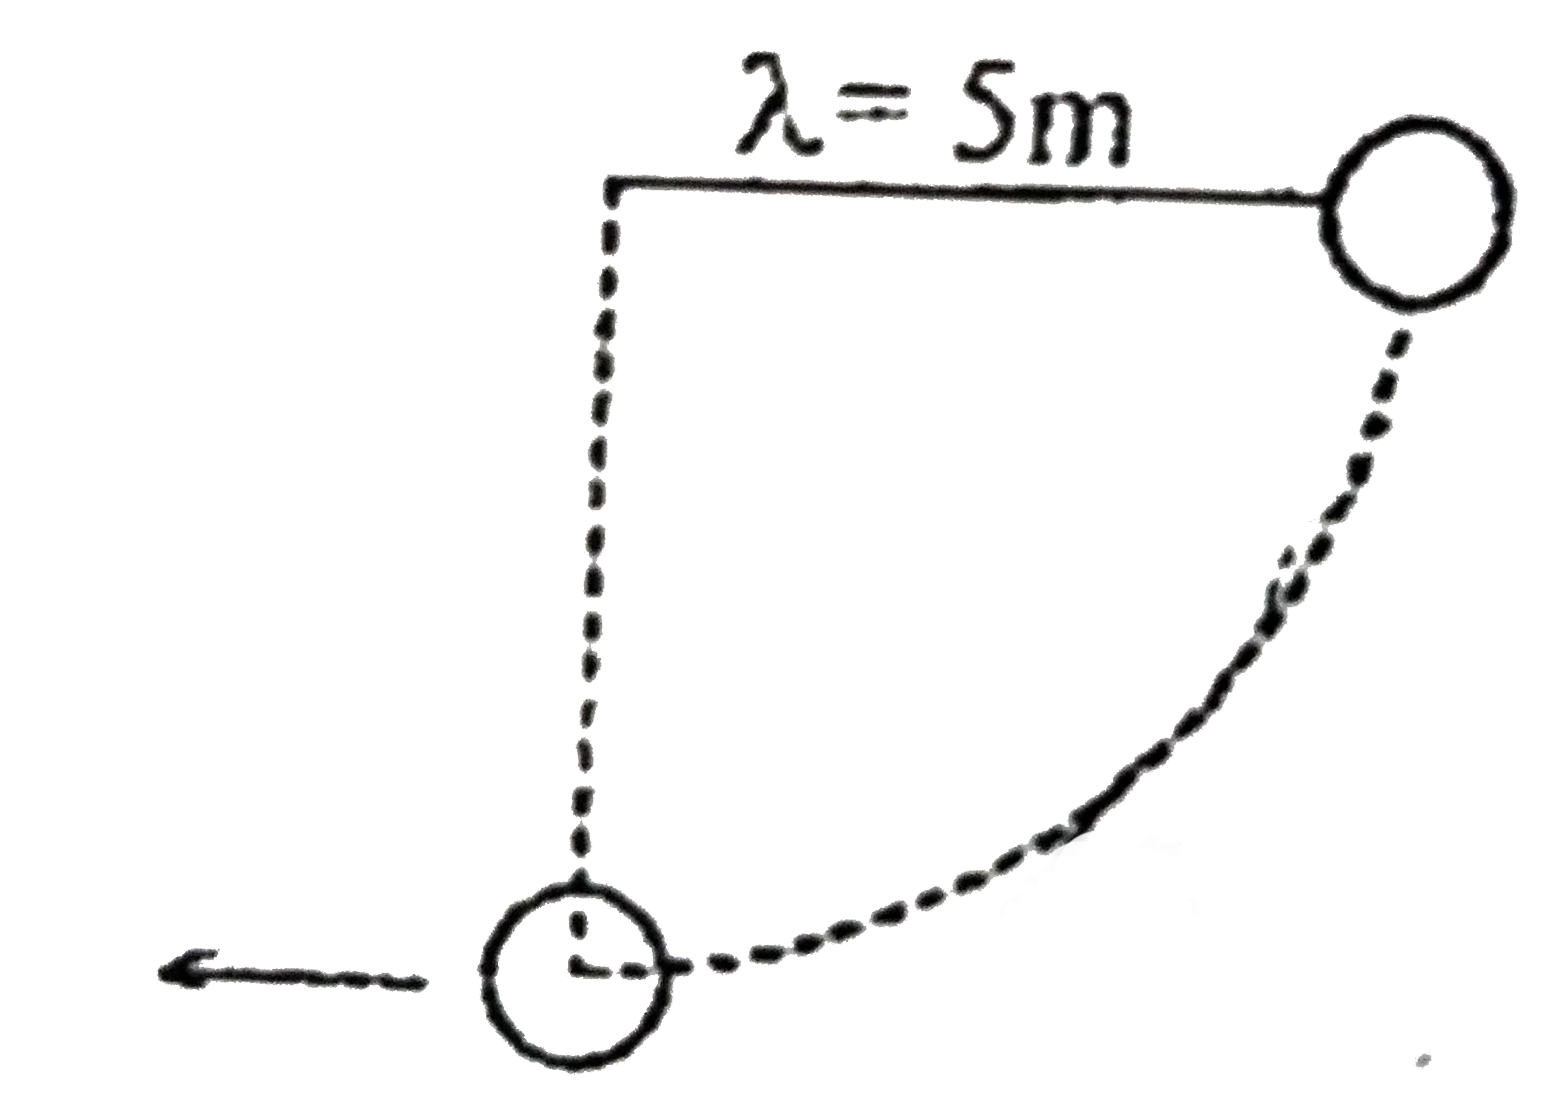 A pendulum is released from rest from horizontal position as shown. The tangential acceleration when the pendulum reacheda t lowest when the pendulum reached at lowest position on its path is